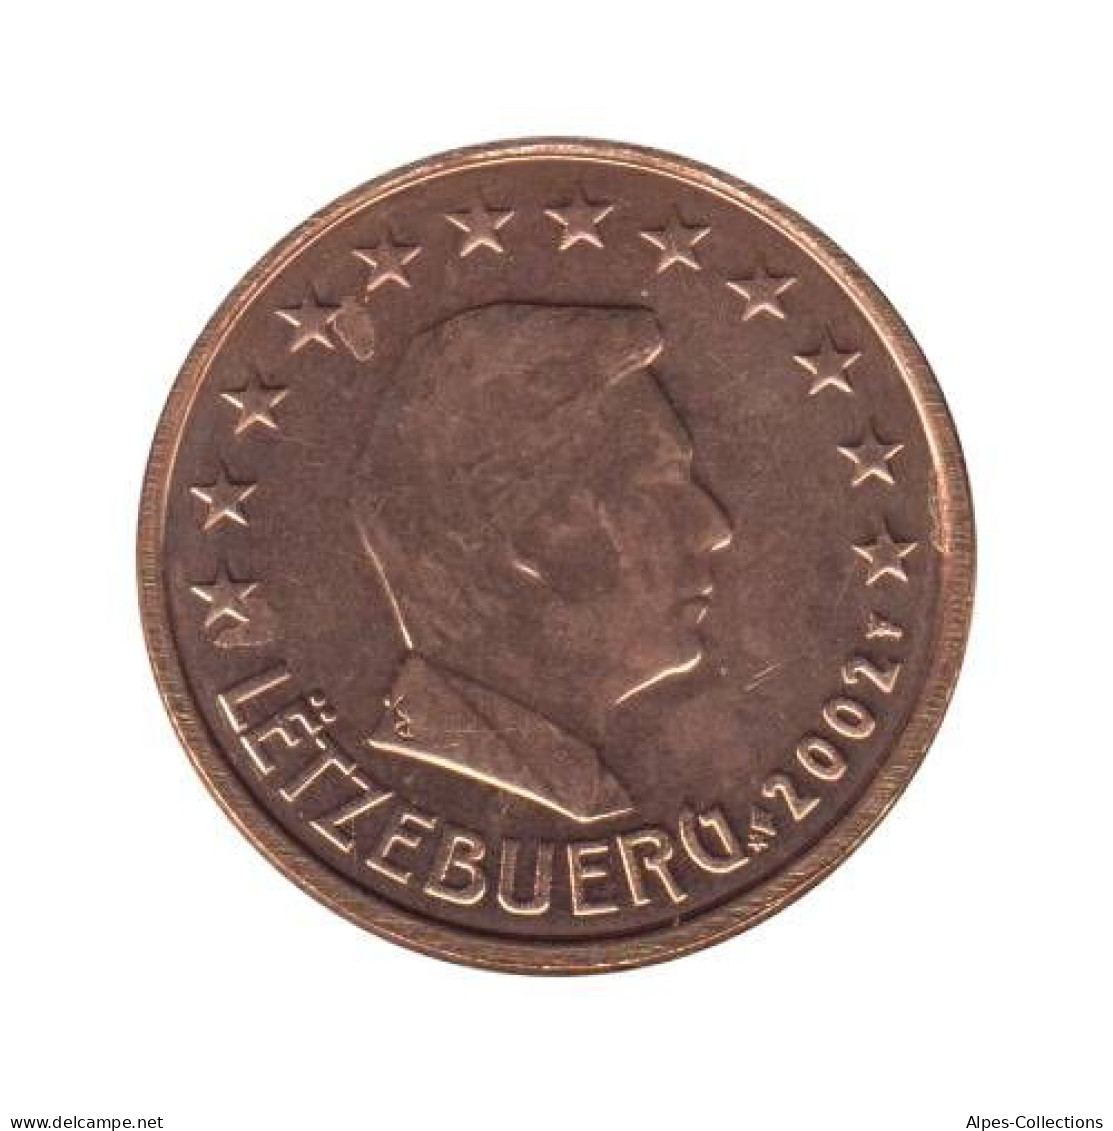 LU00102.1 - LUXEMBOURG - 1 Cent - 2002 - Luxembourg